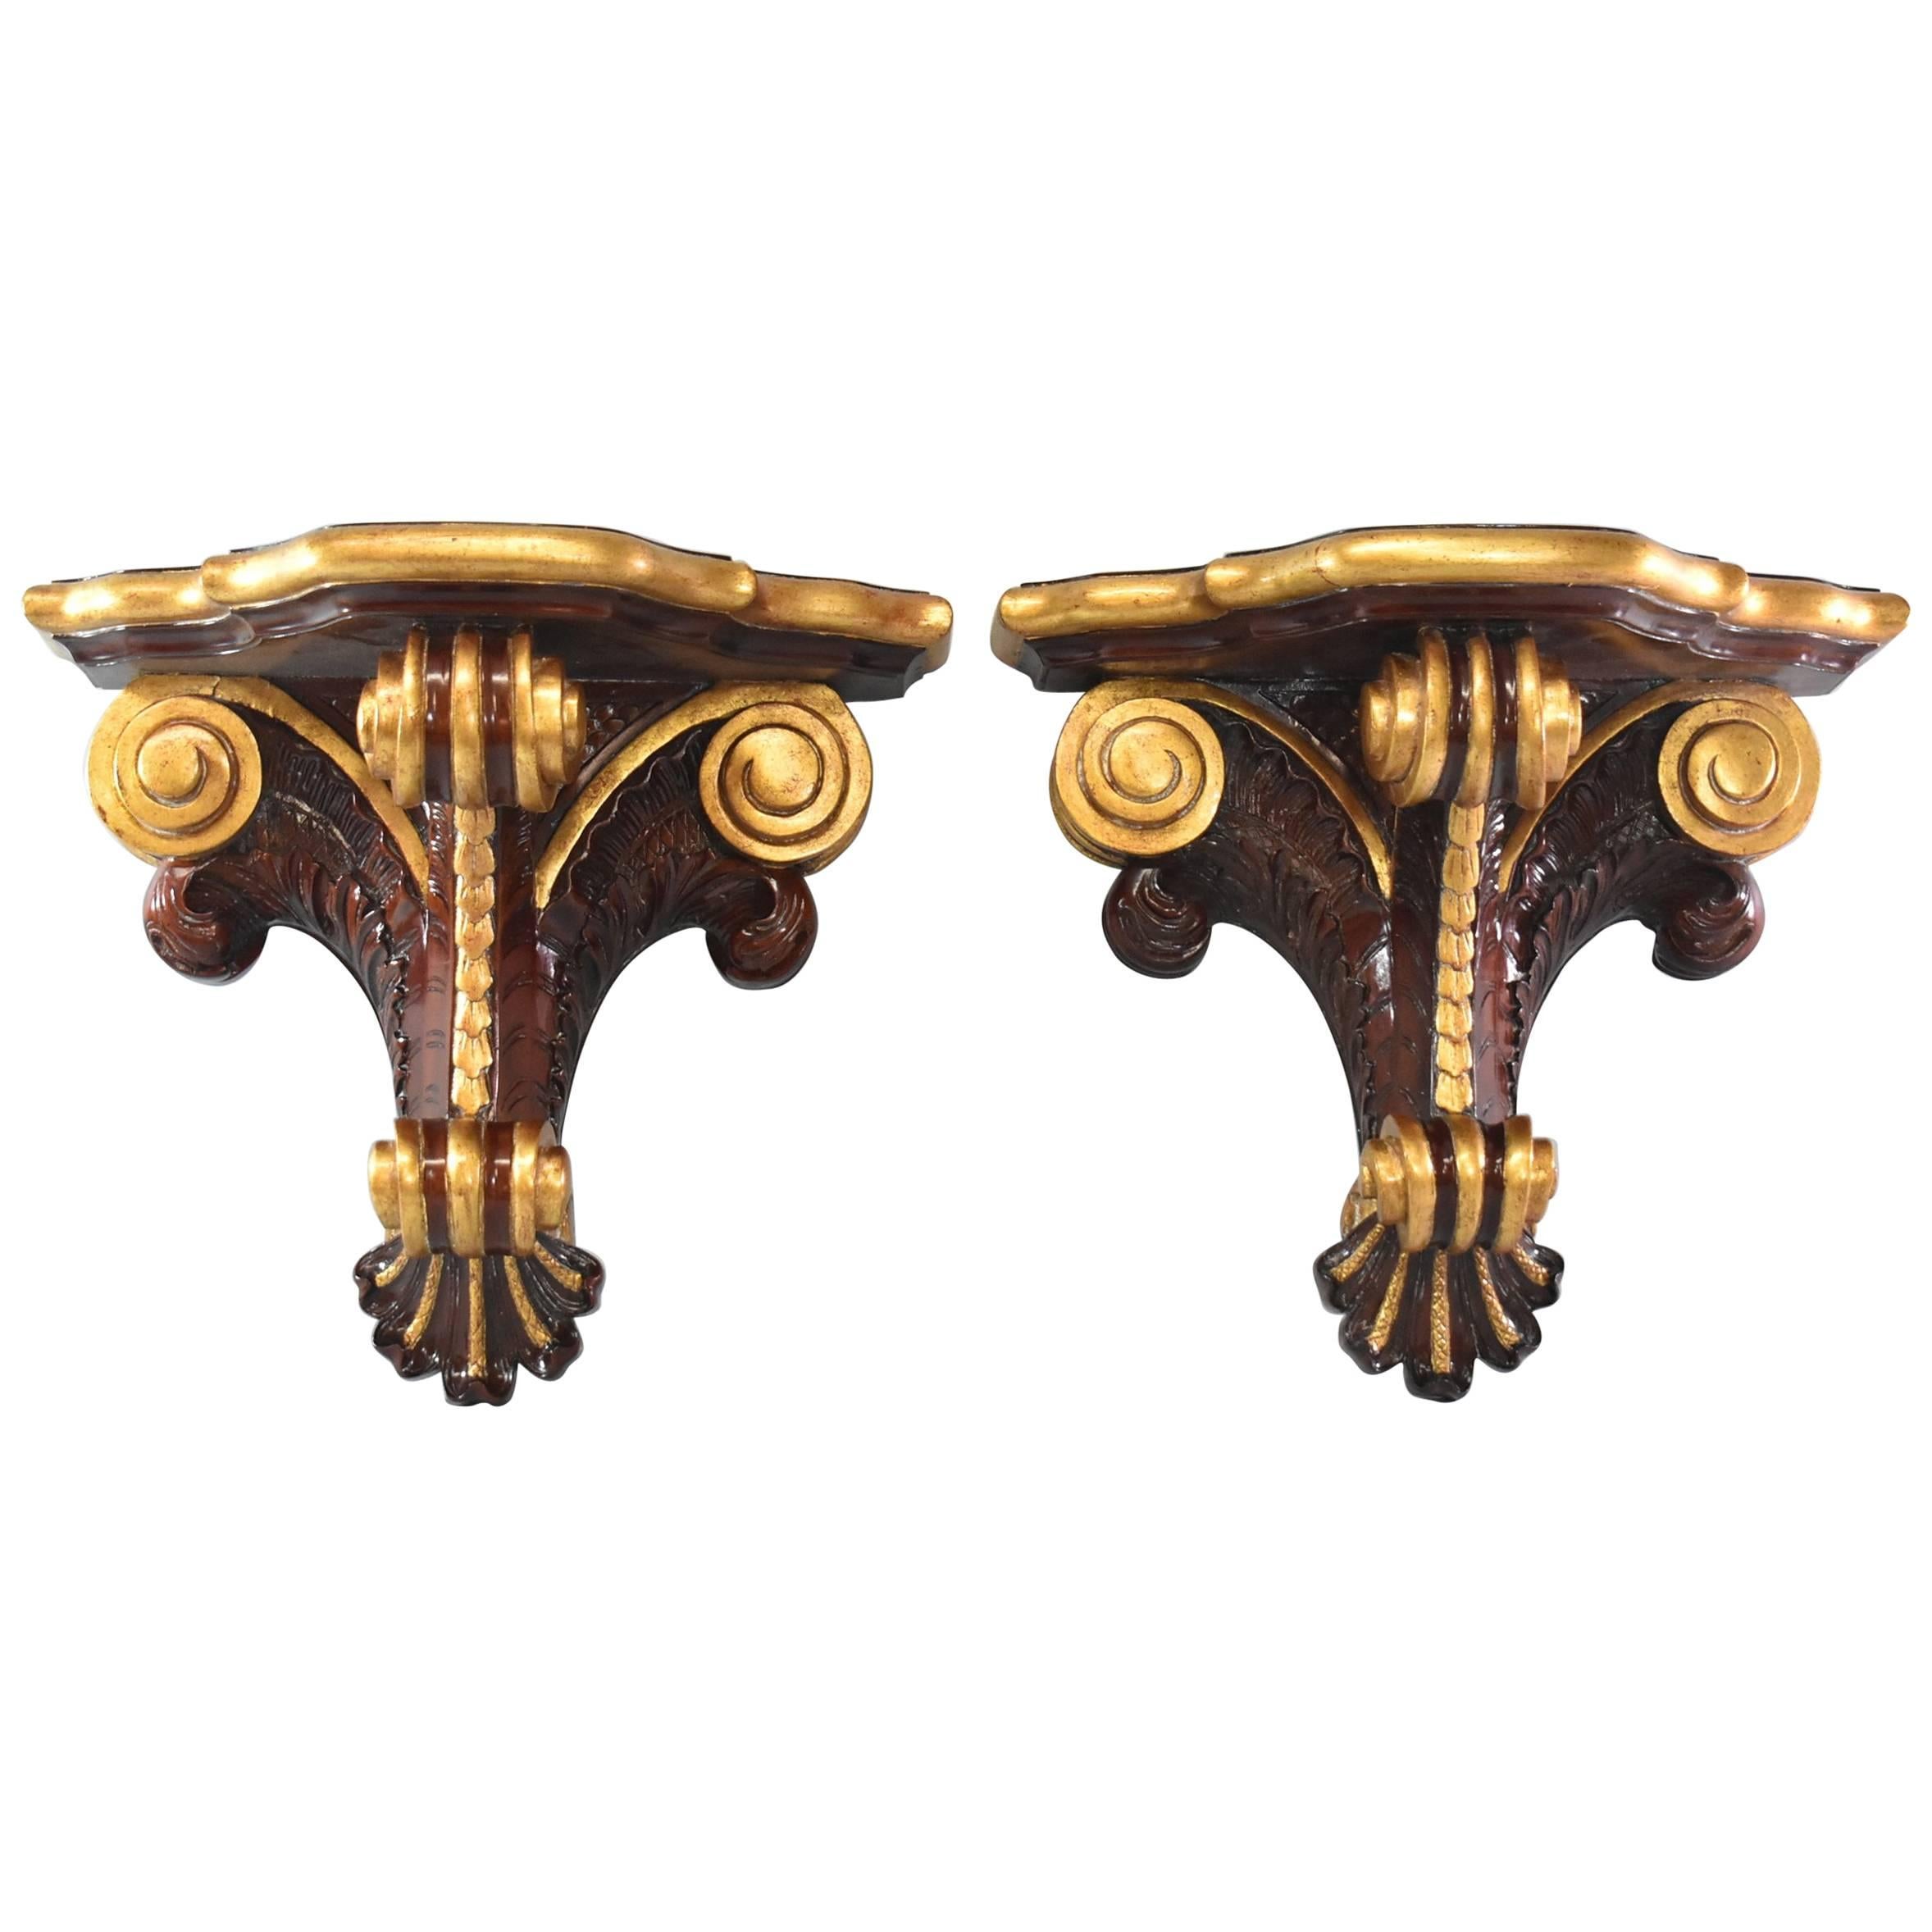 Pair of Mahogany Wall Shelves with Gilded Accents by Maitland-Smith